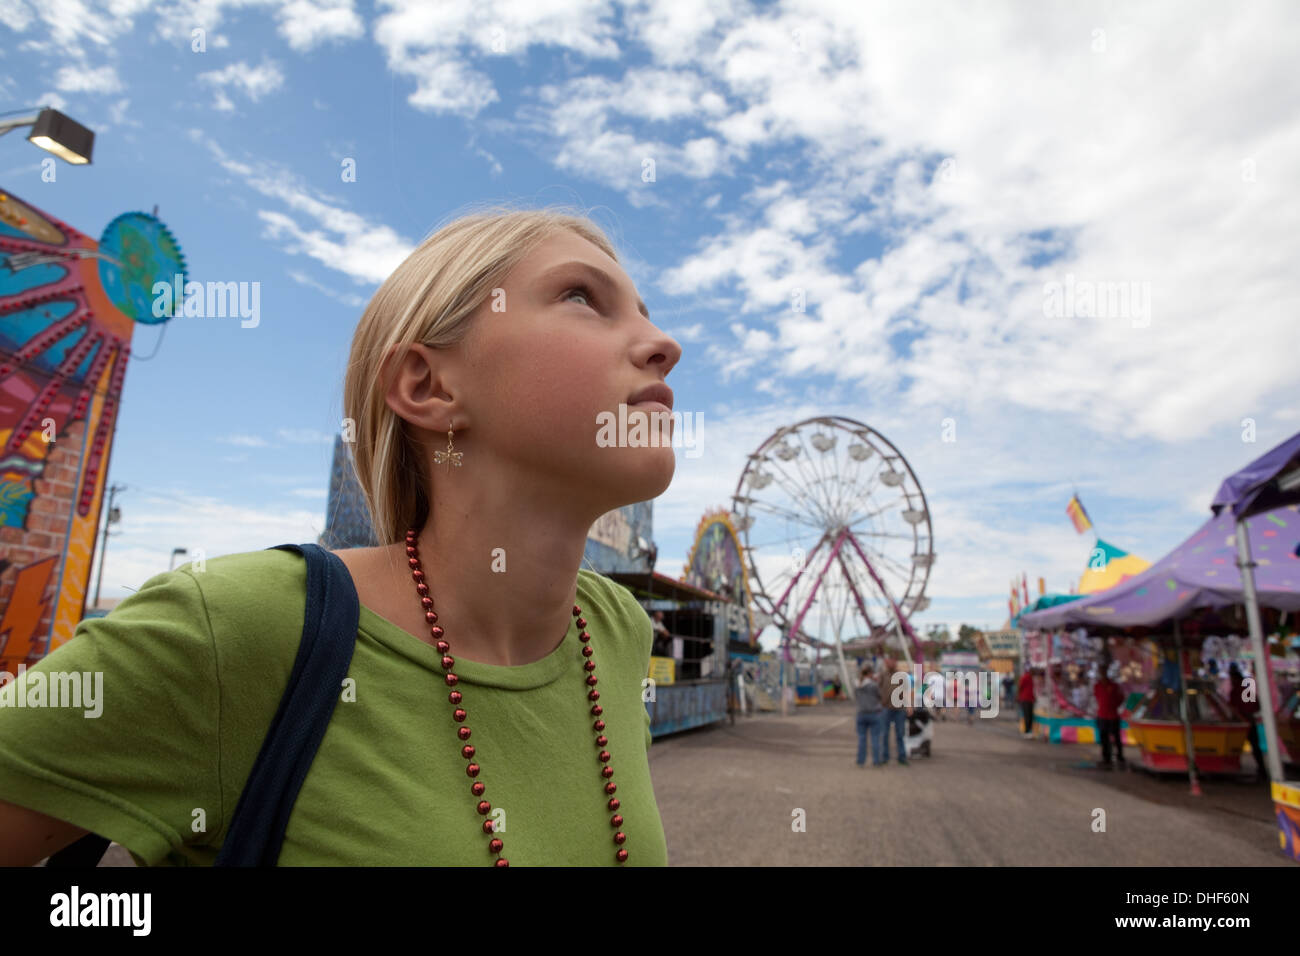 Twelve year old girl looks up at amusement park rides with a thoughtful expression. Stock Photo